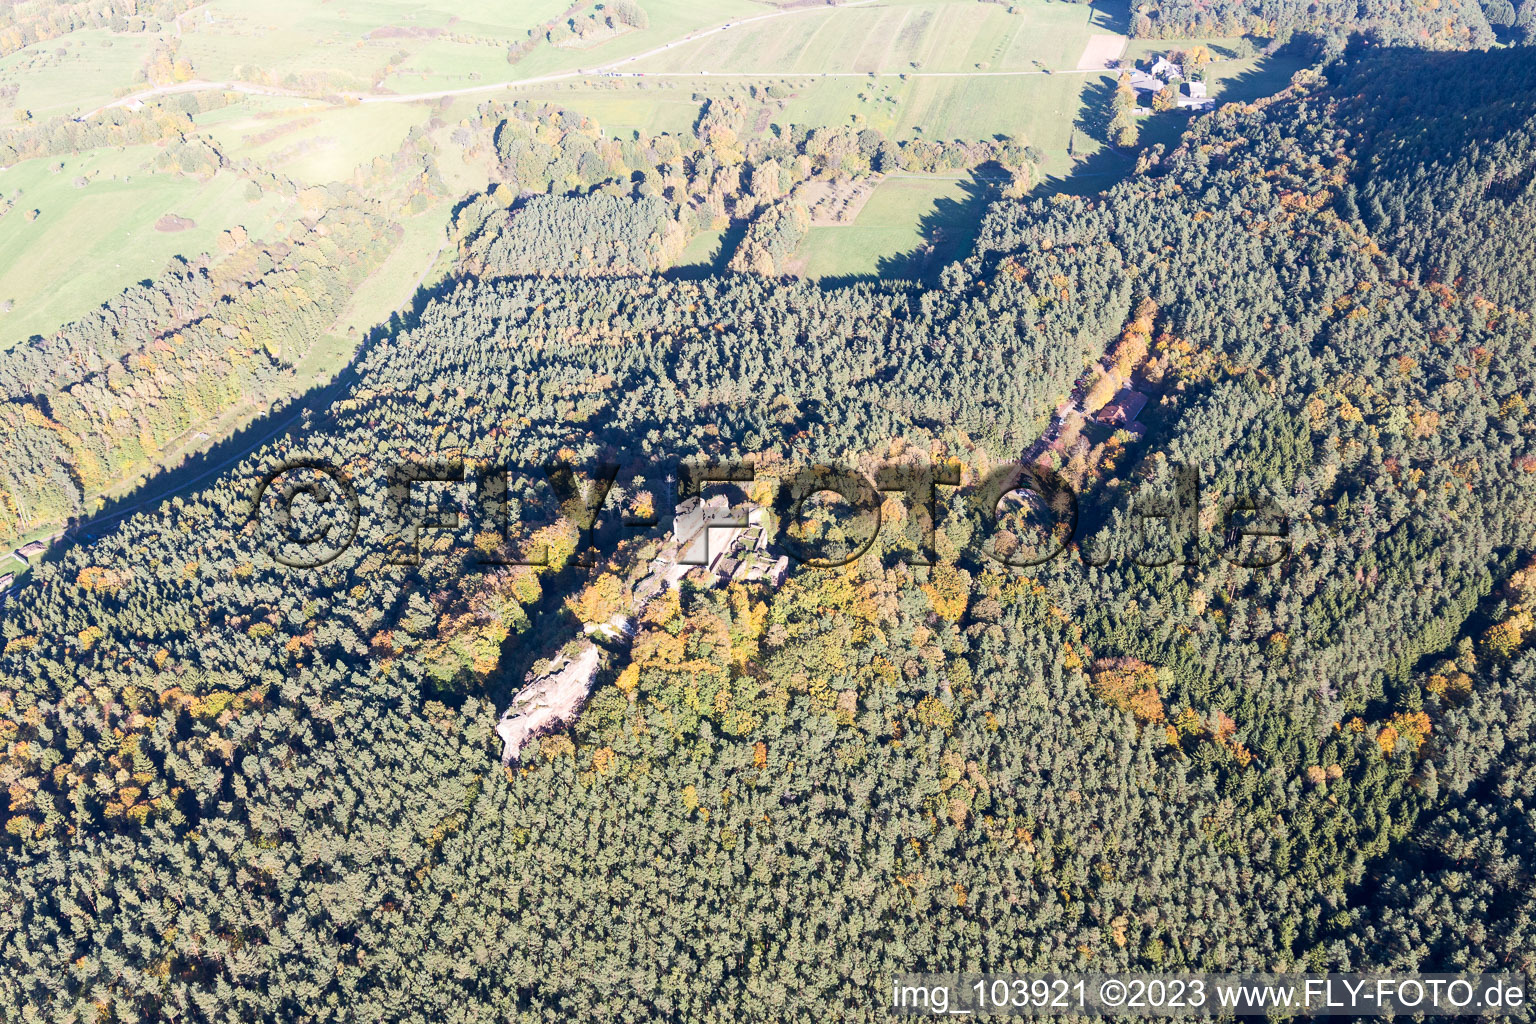 Drachenfels castle ruins in Busenberg in the state Rhineland-Palatinate, Germany out of the air